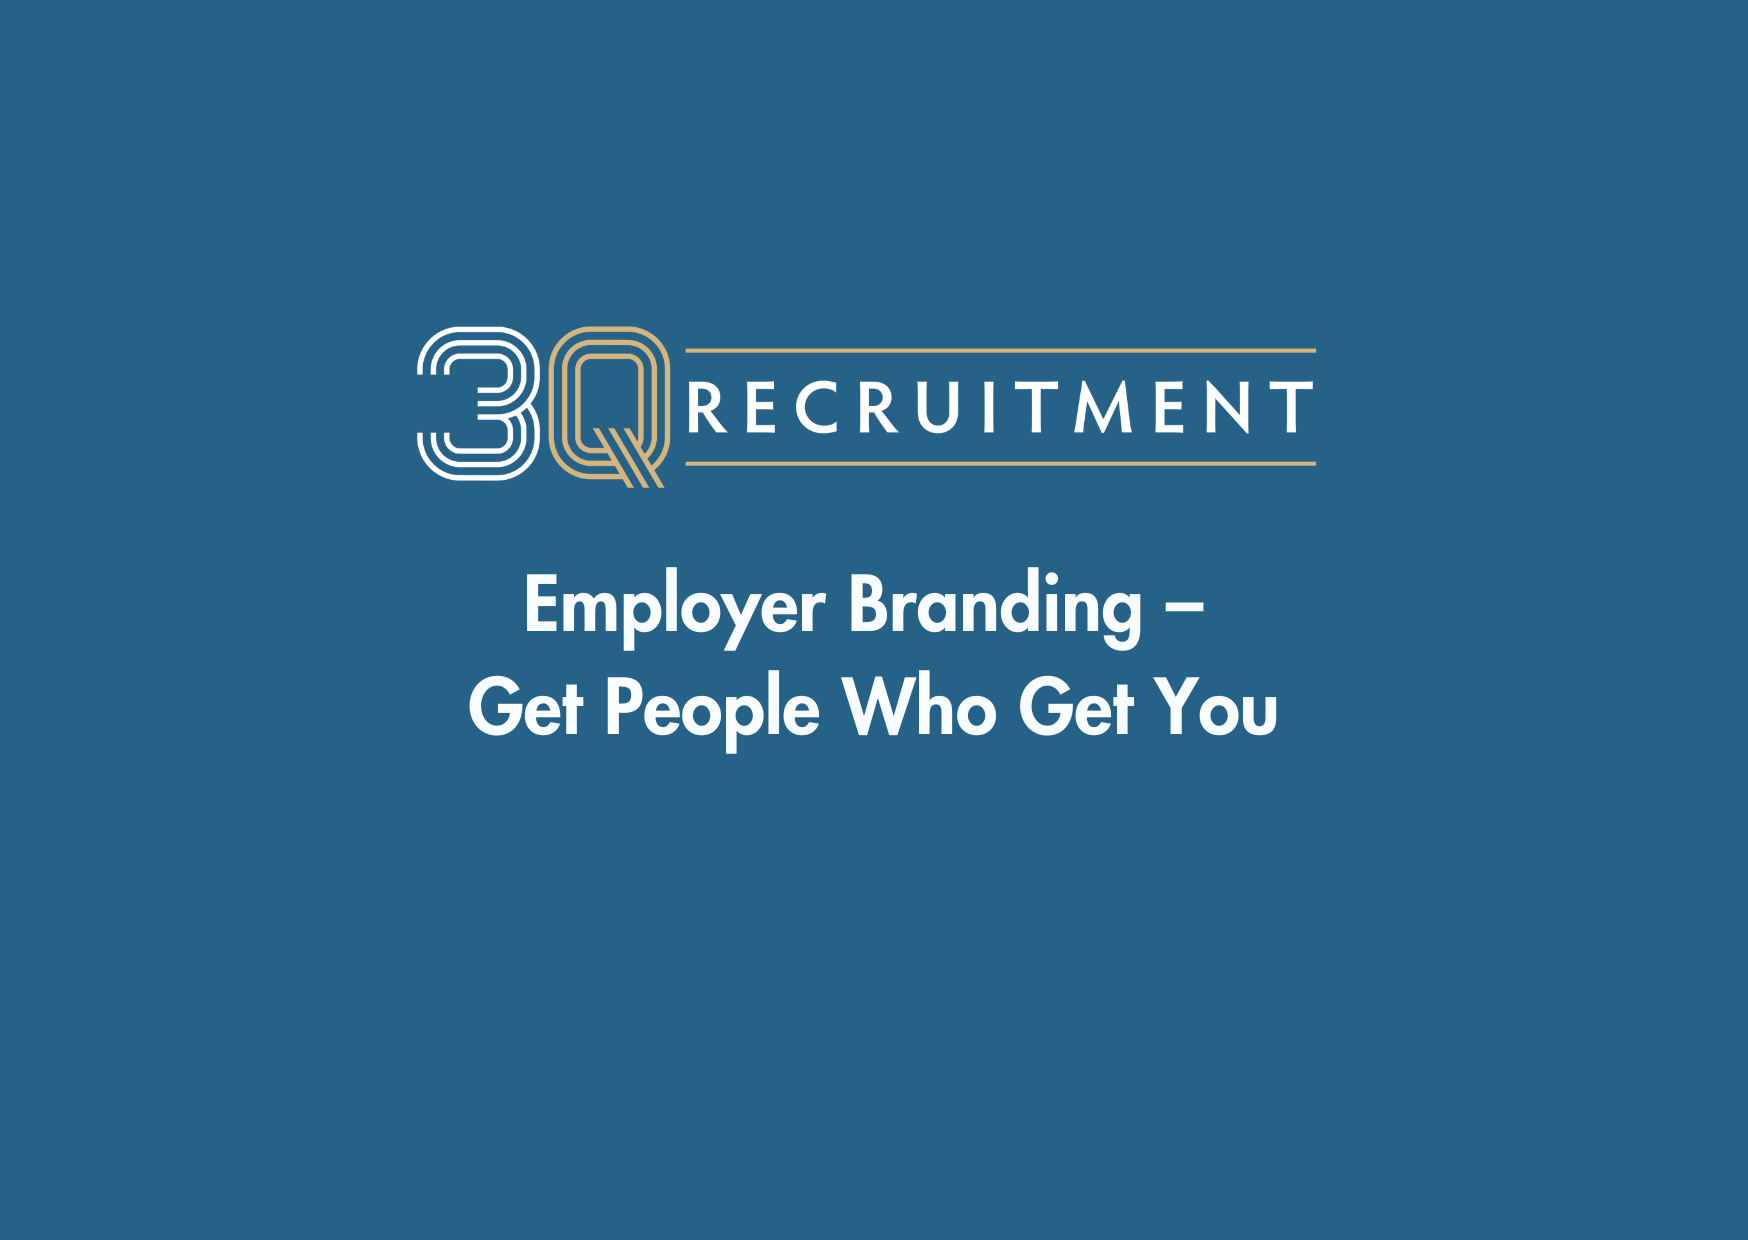 3Q Recruitment Employer Branding – Get People Who Get You